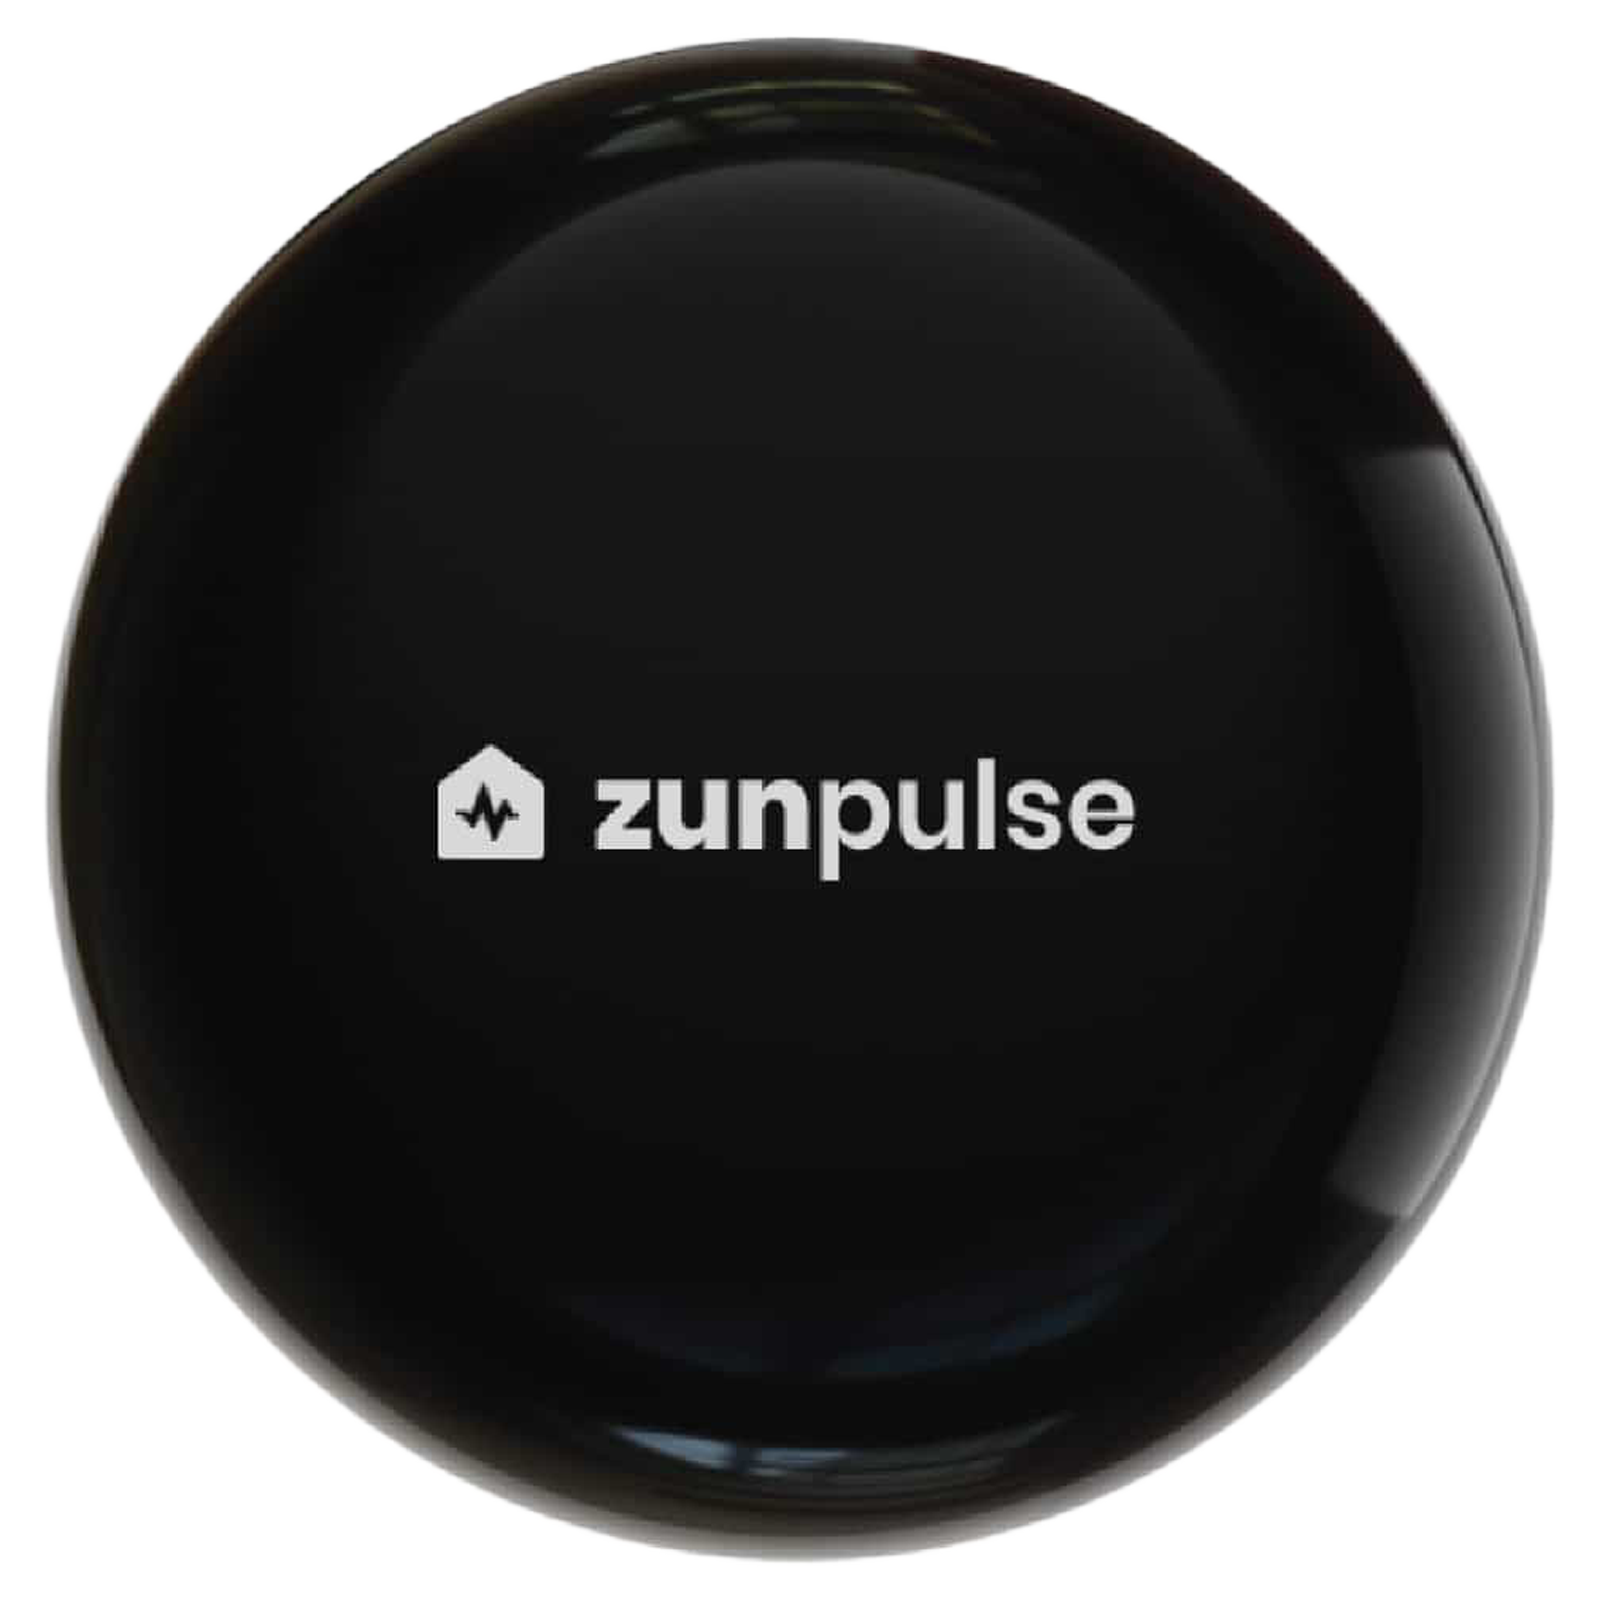 zunpulse Smart Remote Control For Air Conditioner (Wi-Fi Enabled IoT Control, ZUNSACR, Black)